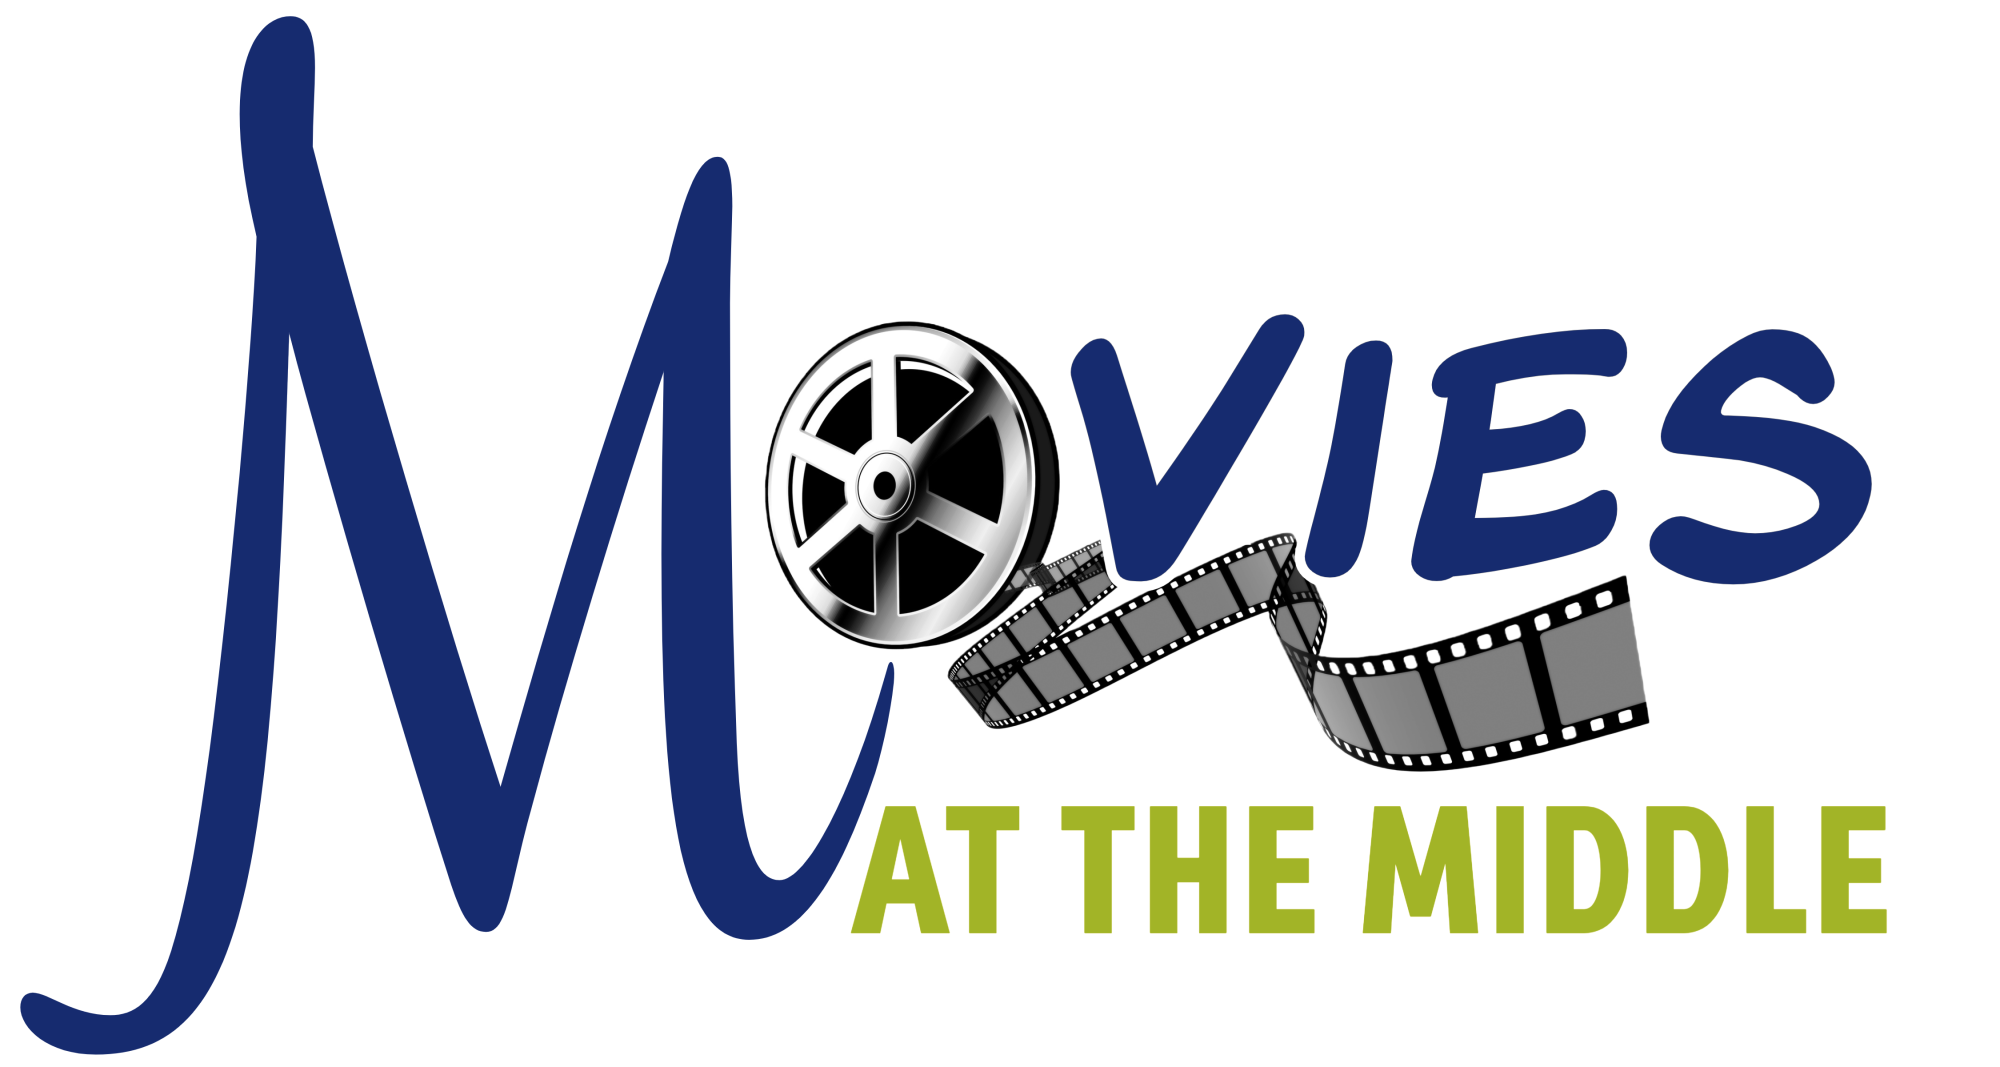 Movies at the middle